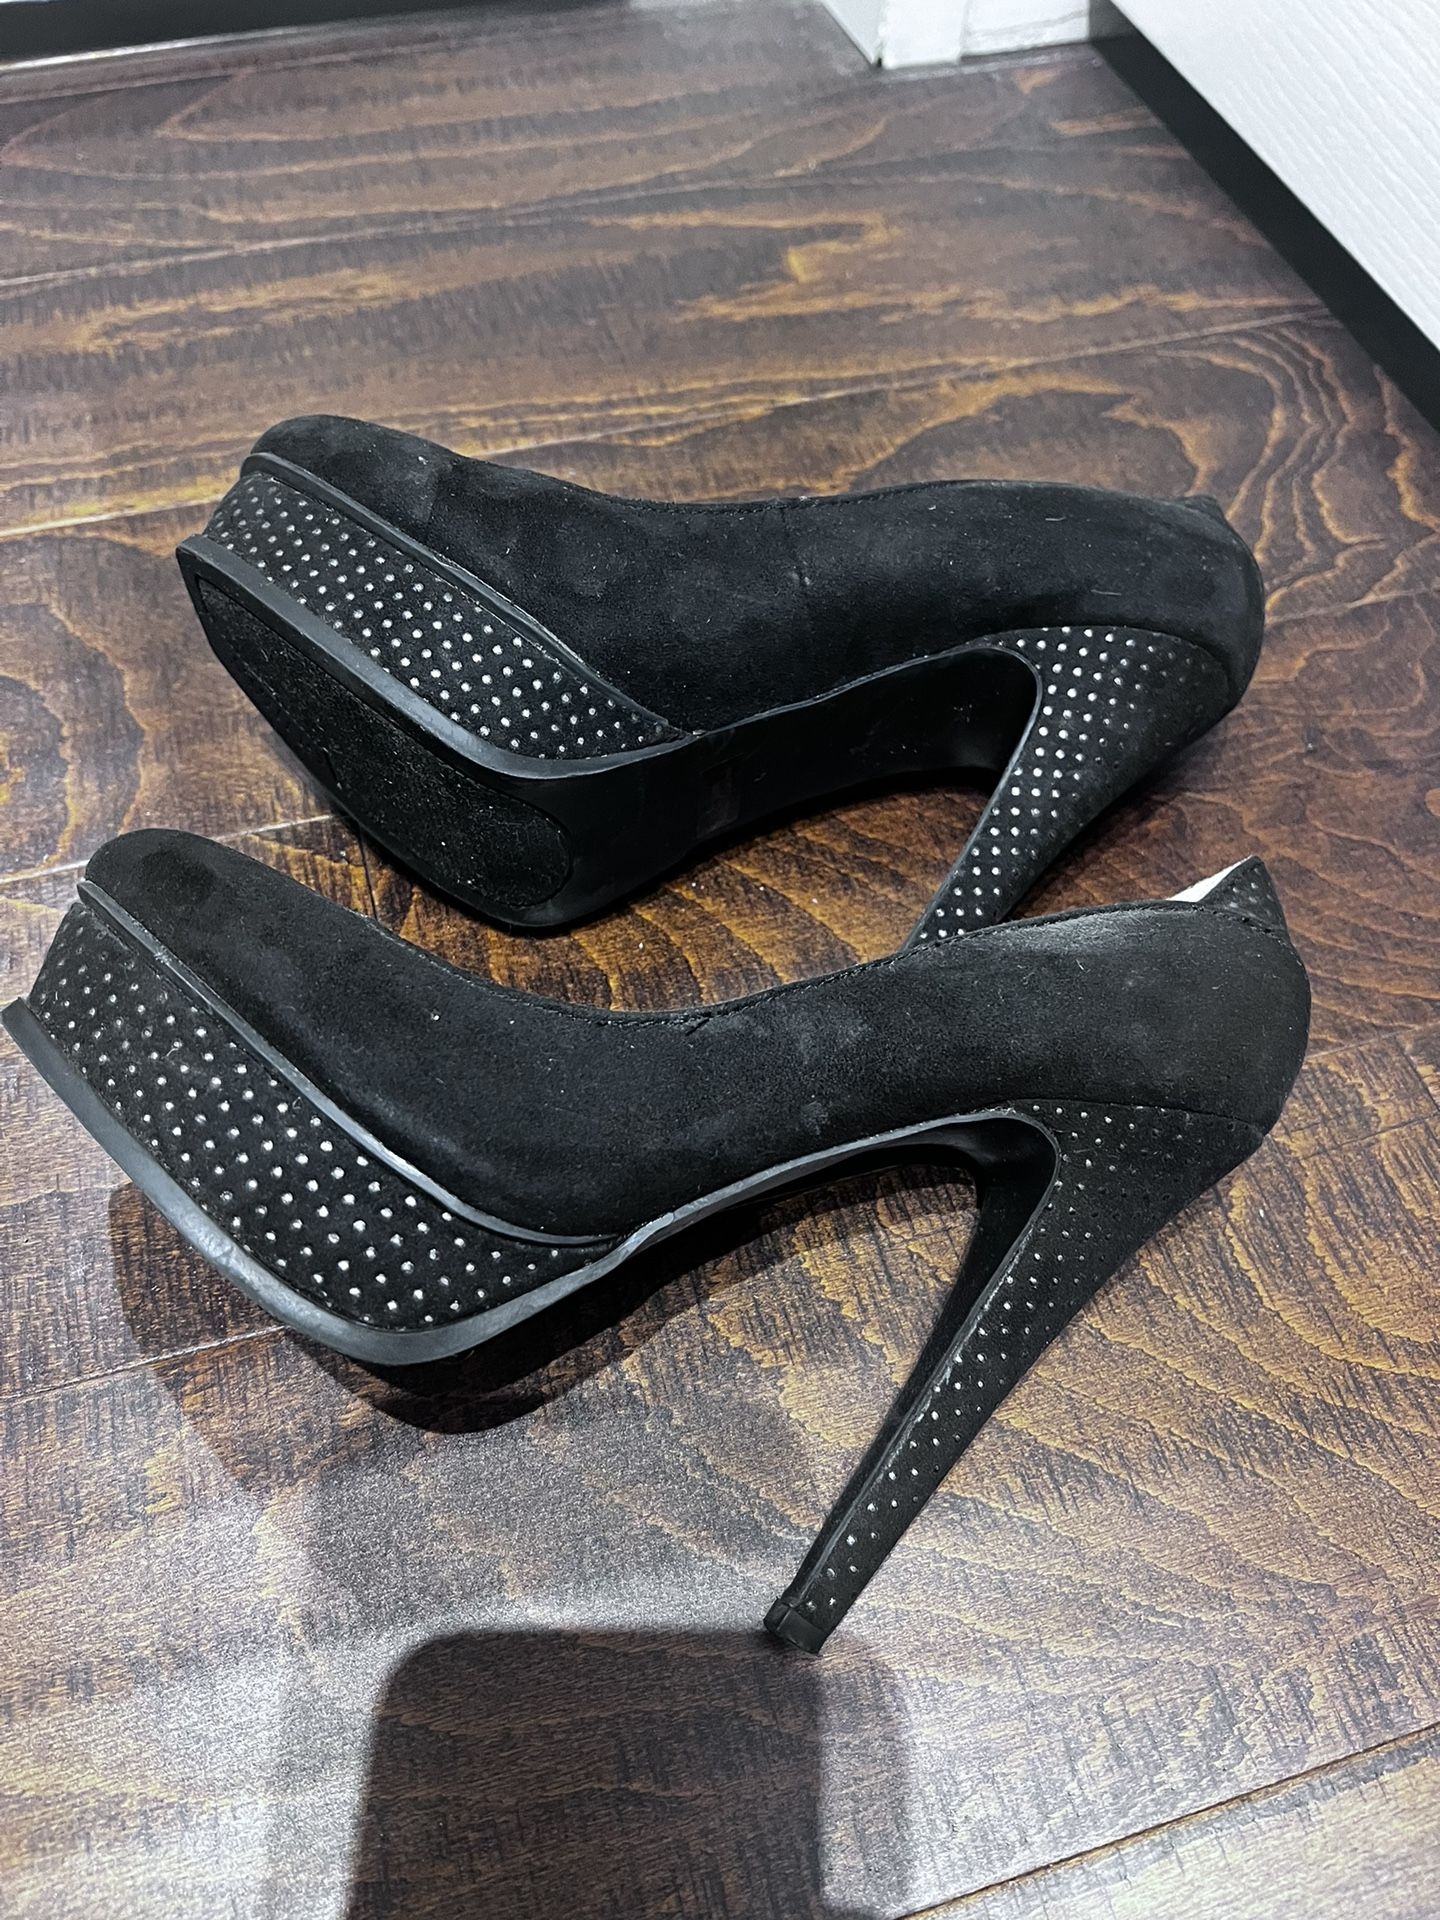 High Heels Shoes Size 7.5 